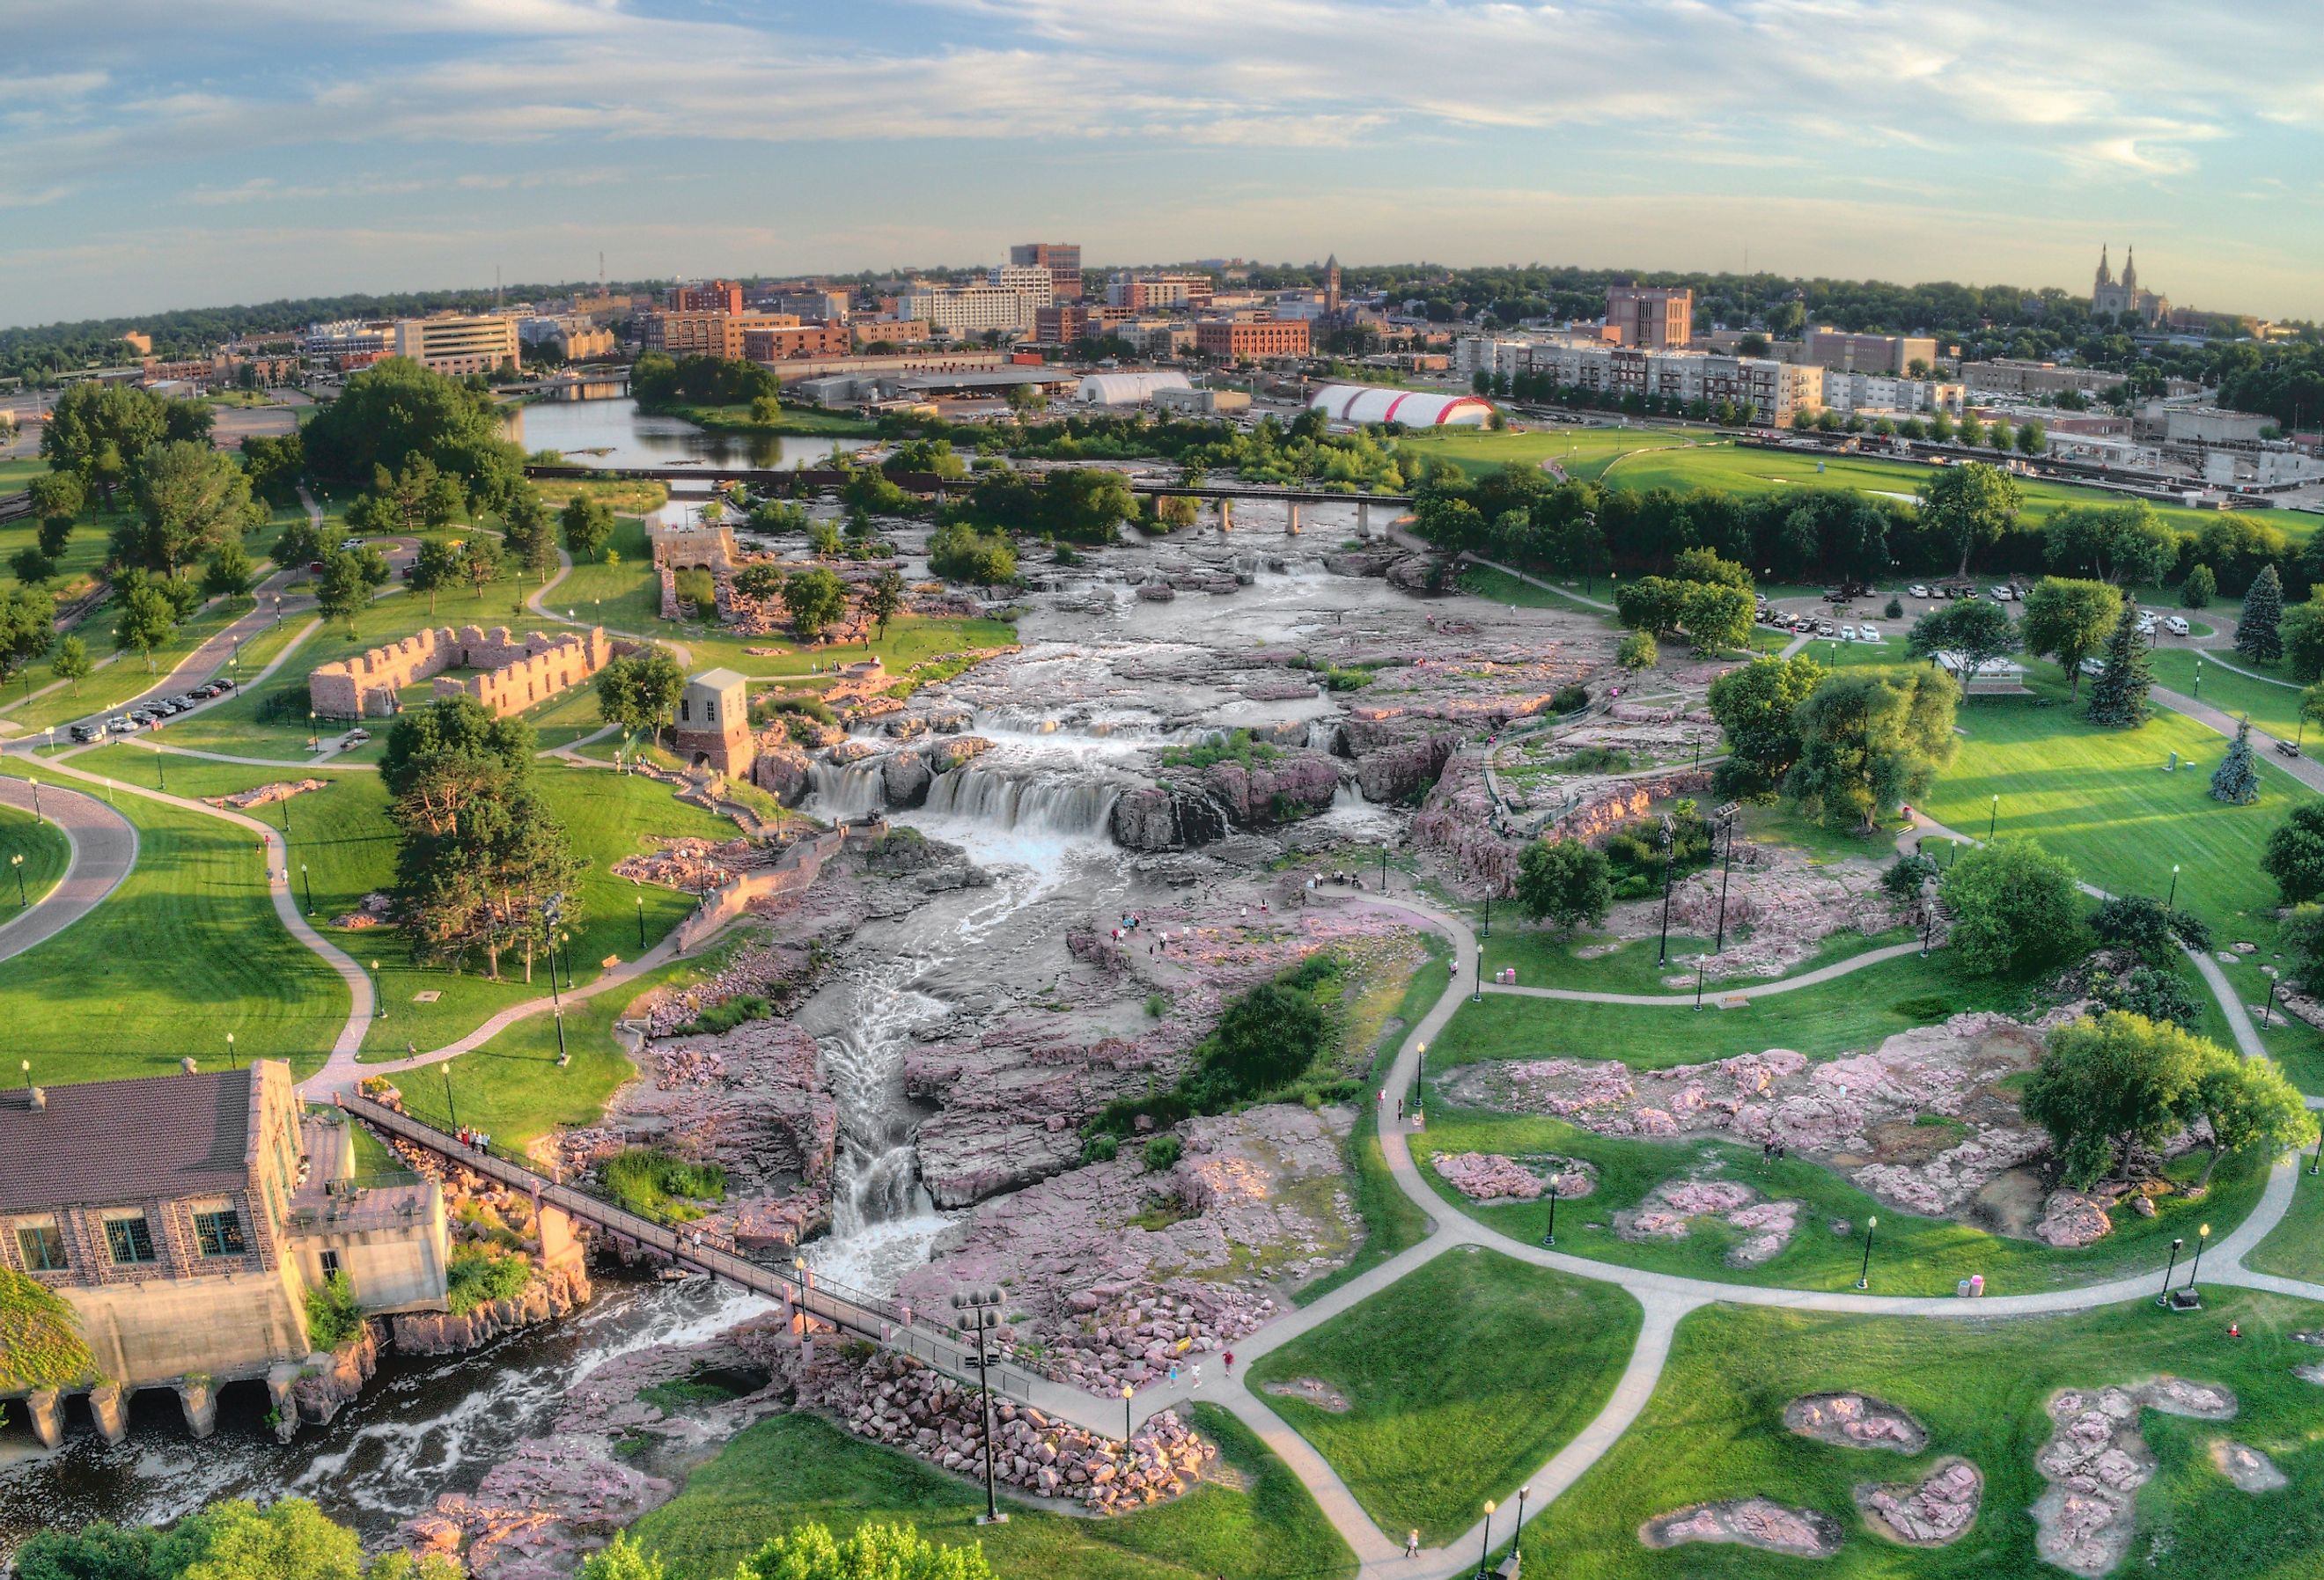 Summer Aerial View of Sioux Falls, the largest city in the State of South Dakota.